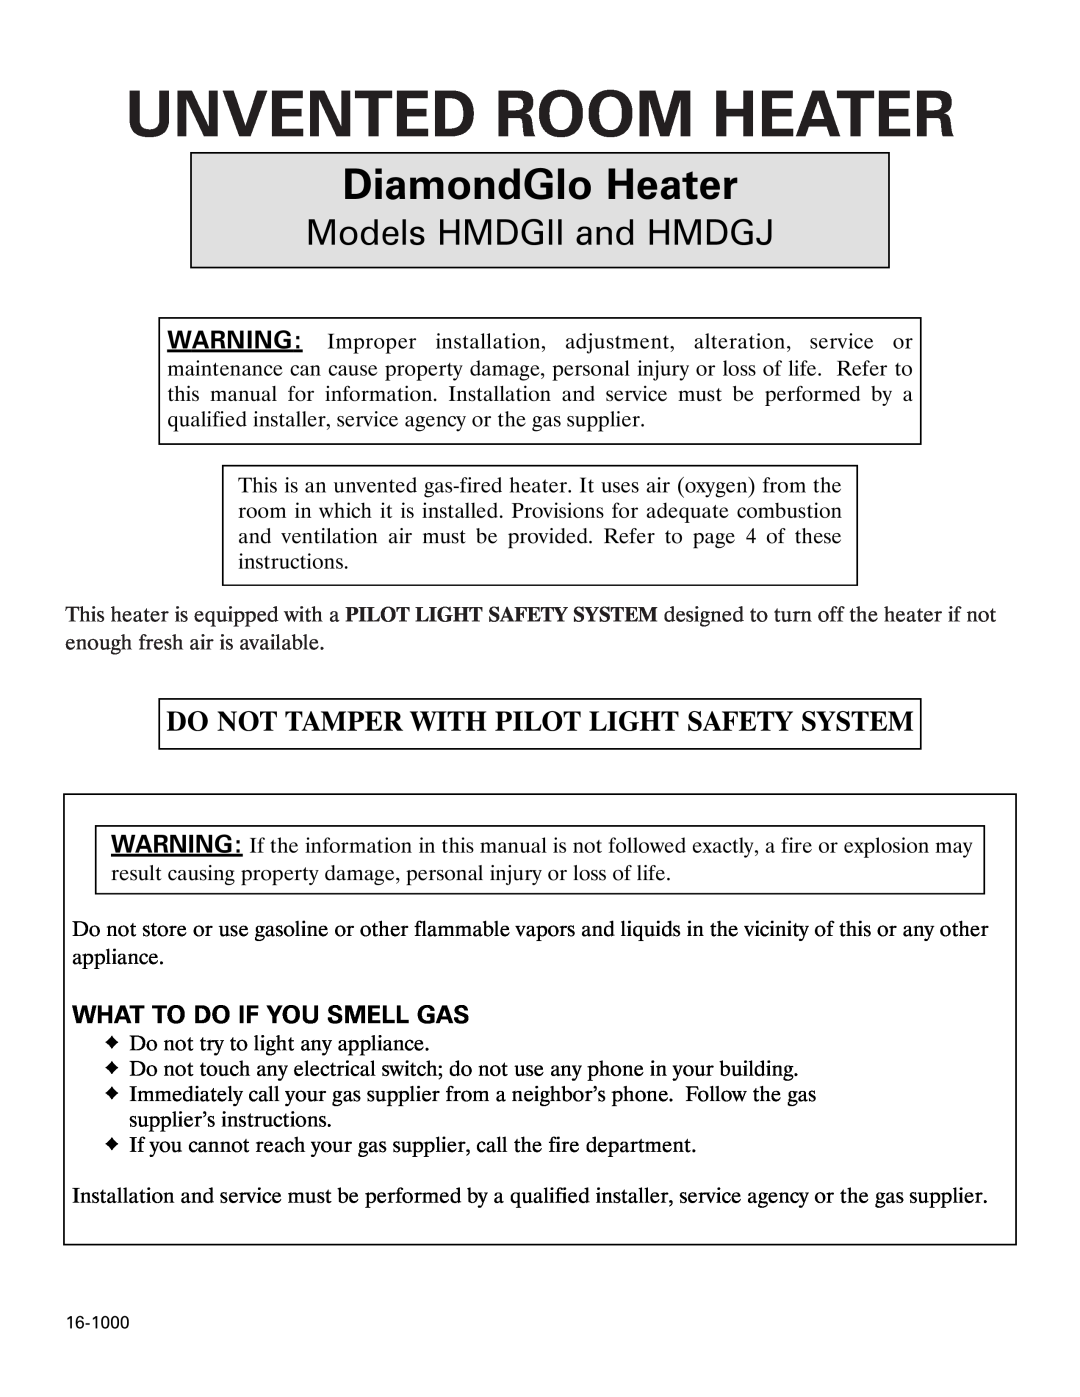 Heatmaster HMDGJ manual DiamondGlo Heater, Do Not Tamper With Pilot Light Safety System, What To Do If You Smell Gas 